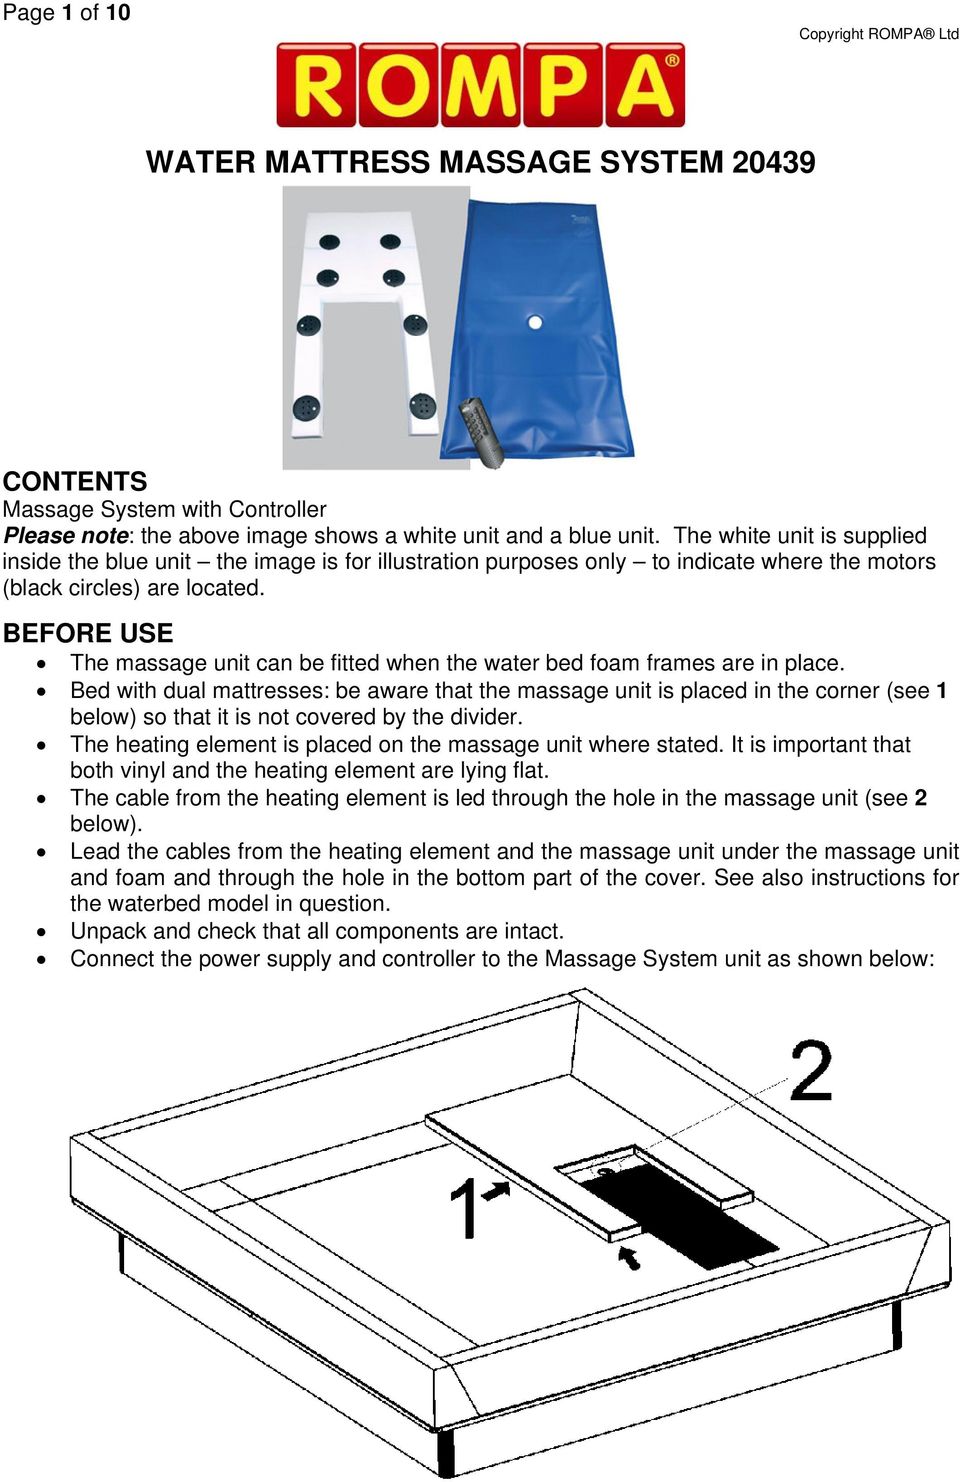 BEFORE USE The massage unit can be fitted when the water bed foam frames are in place.